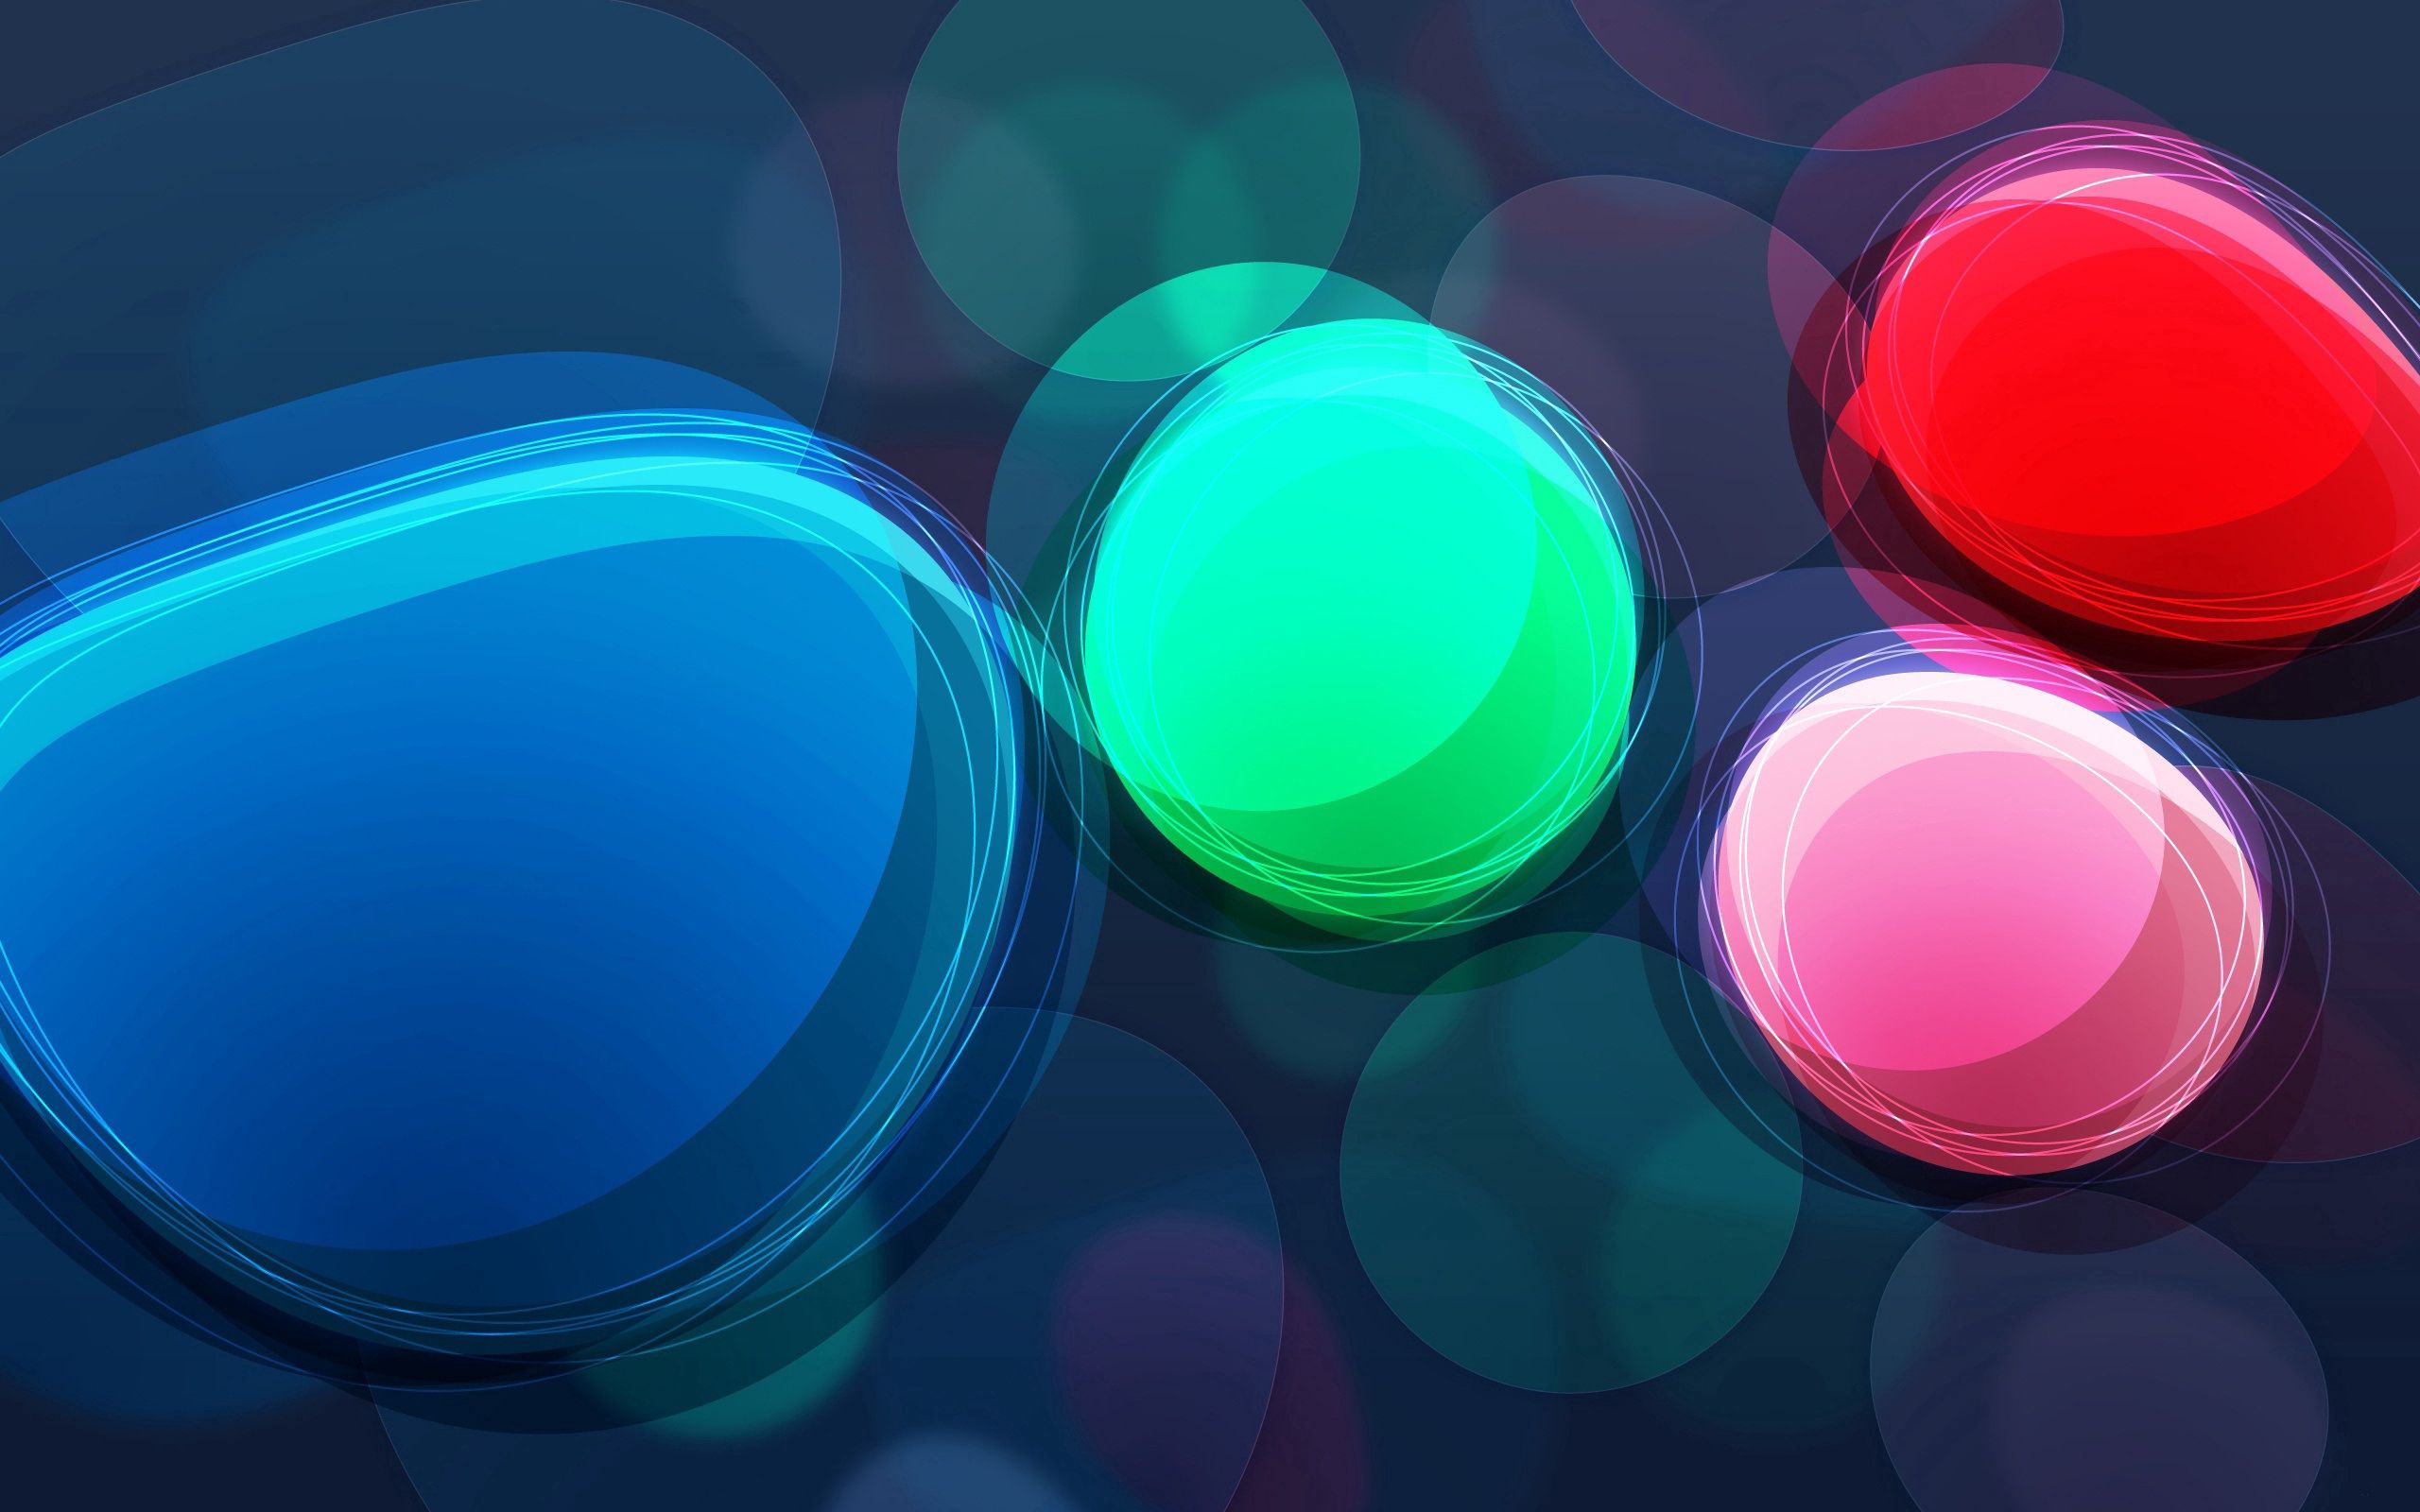 multicolored, colorful, colourful, abstract, circles, motley Image for desktop